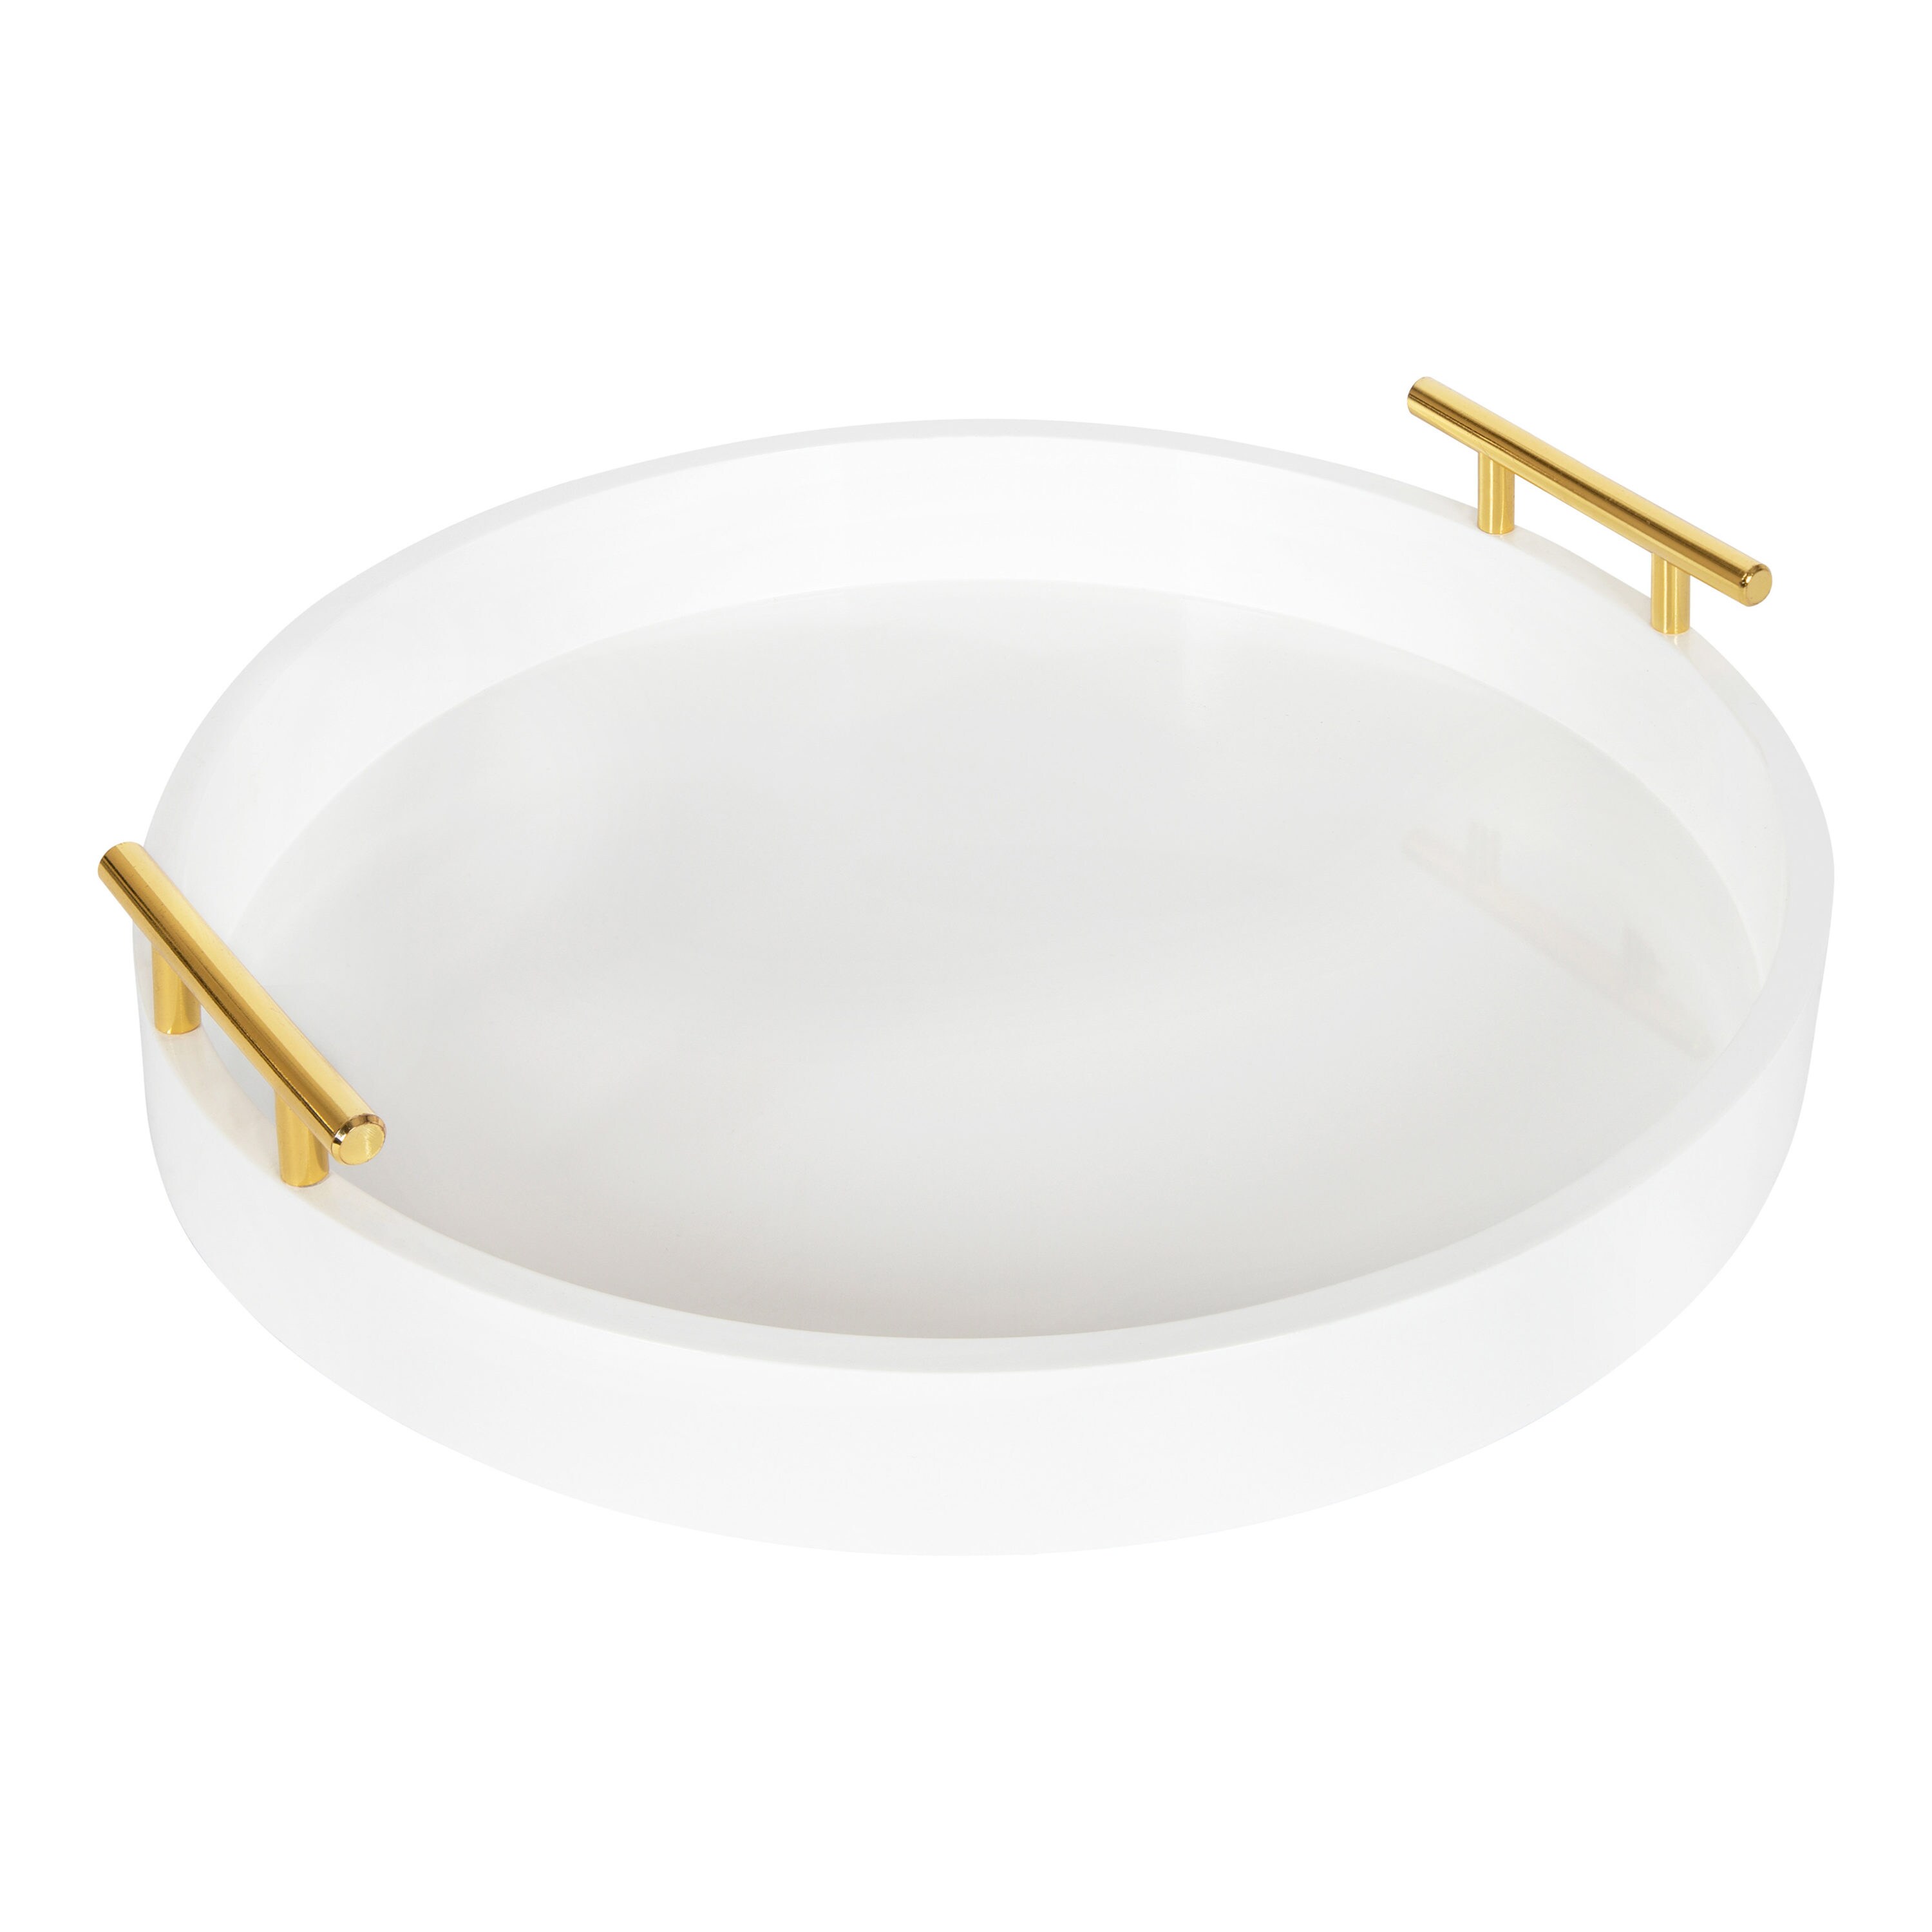 5640 - Round Cake Tray W/Cover